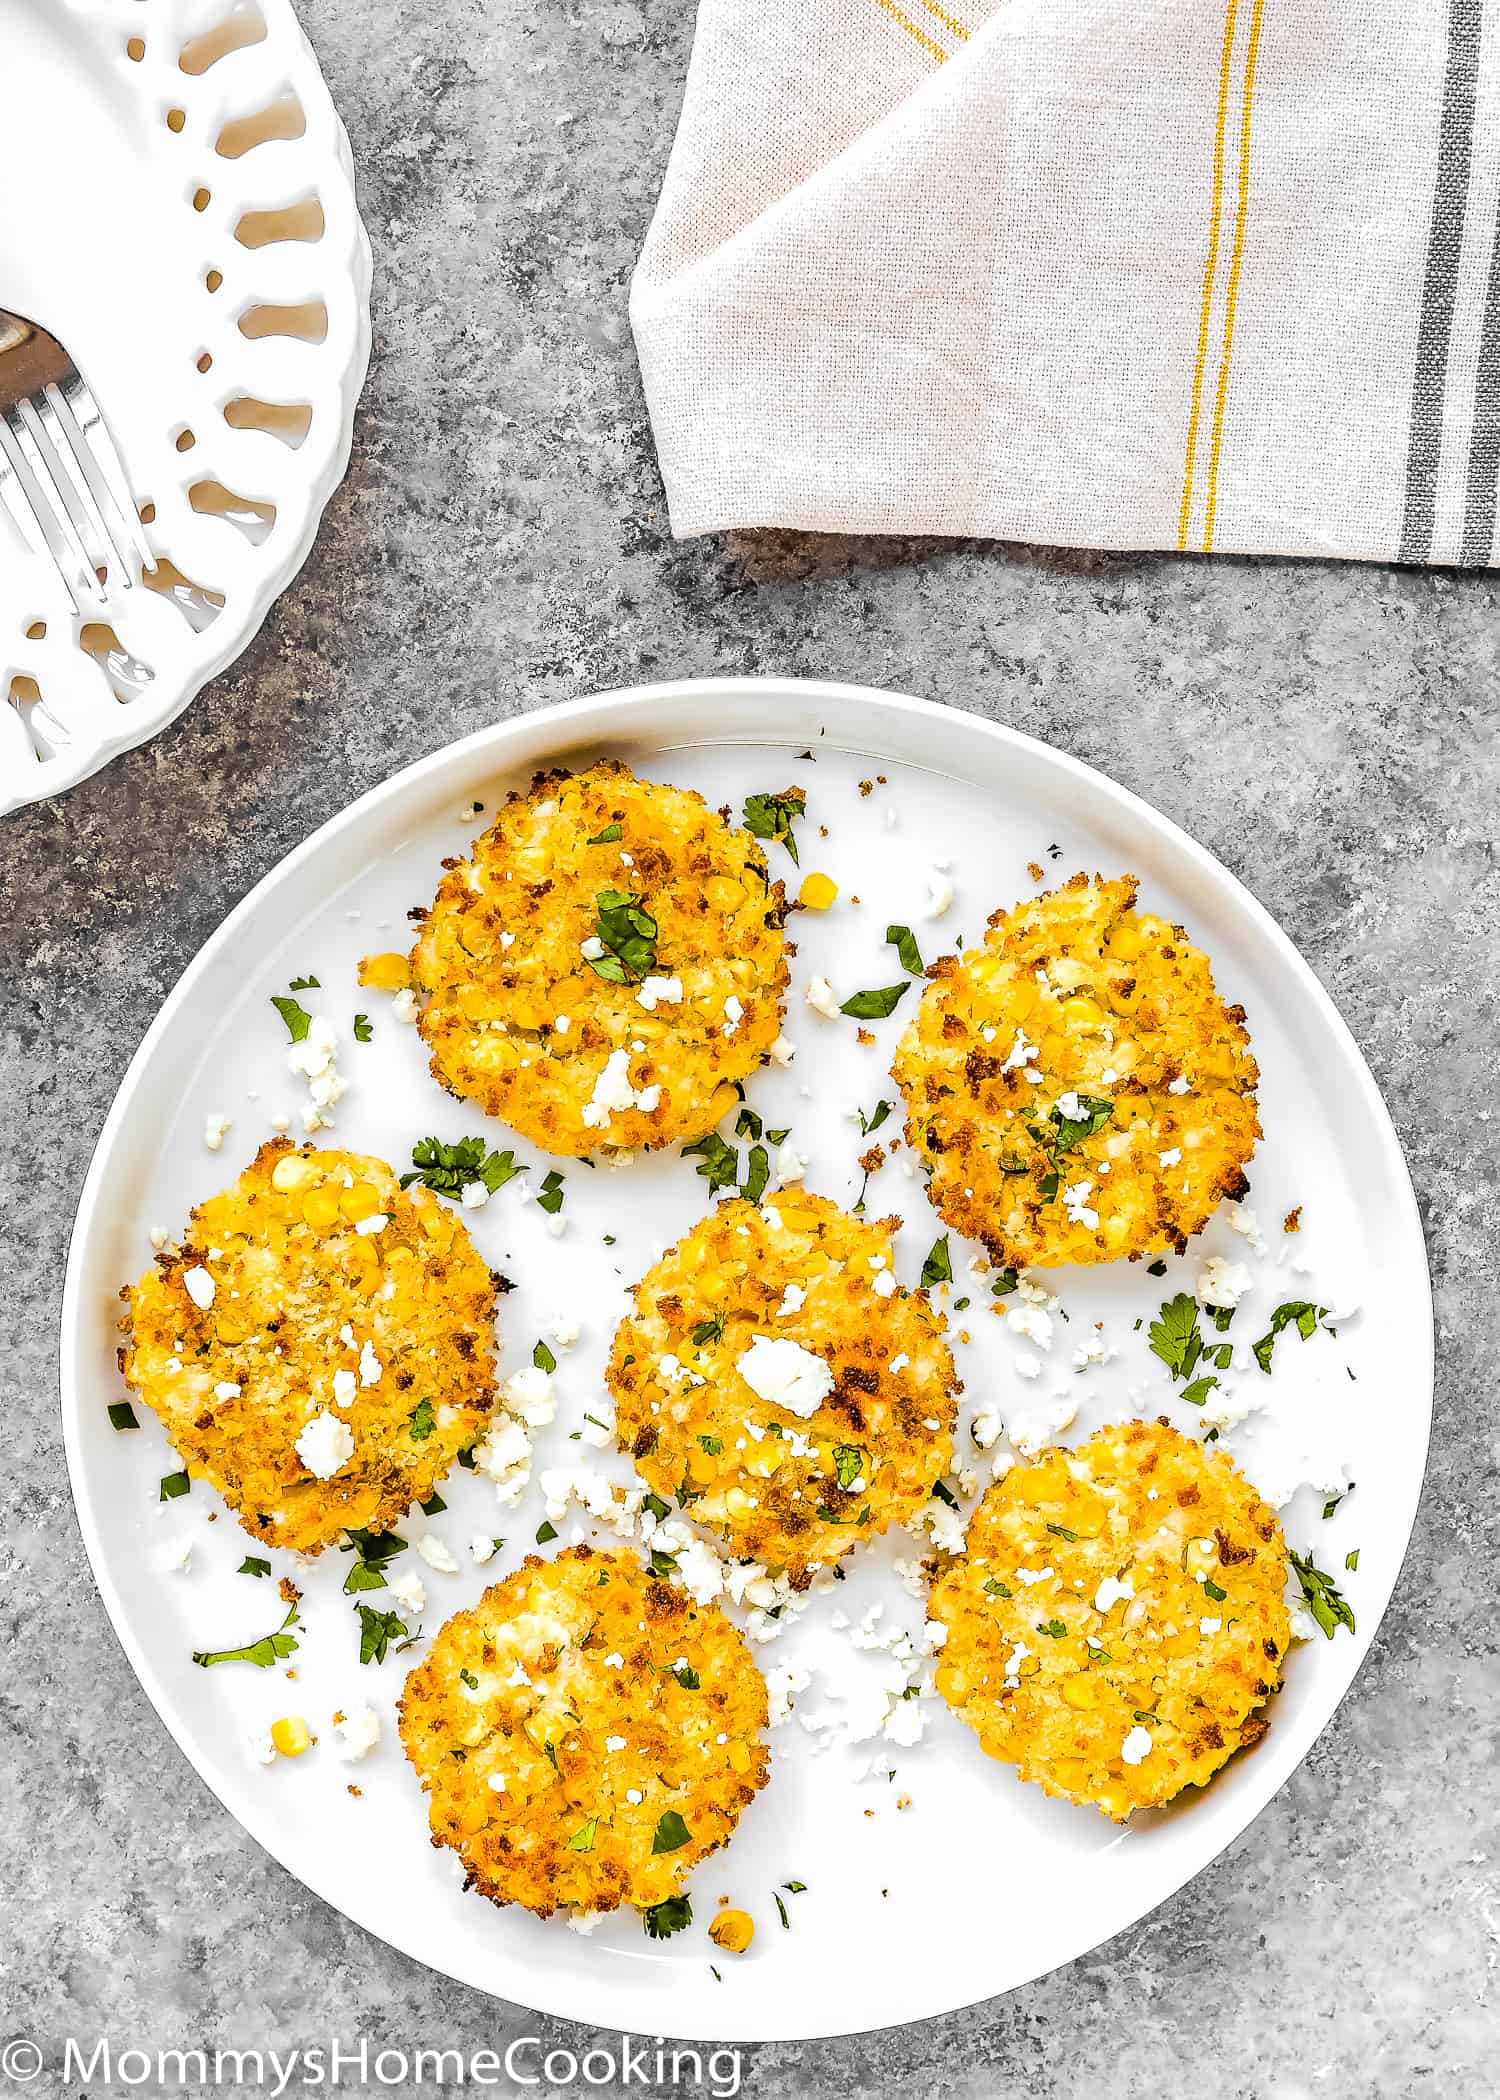 eggless corn fritters on a plate over a grey surface with two white plate on the side and a kitchen towel.